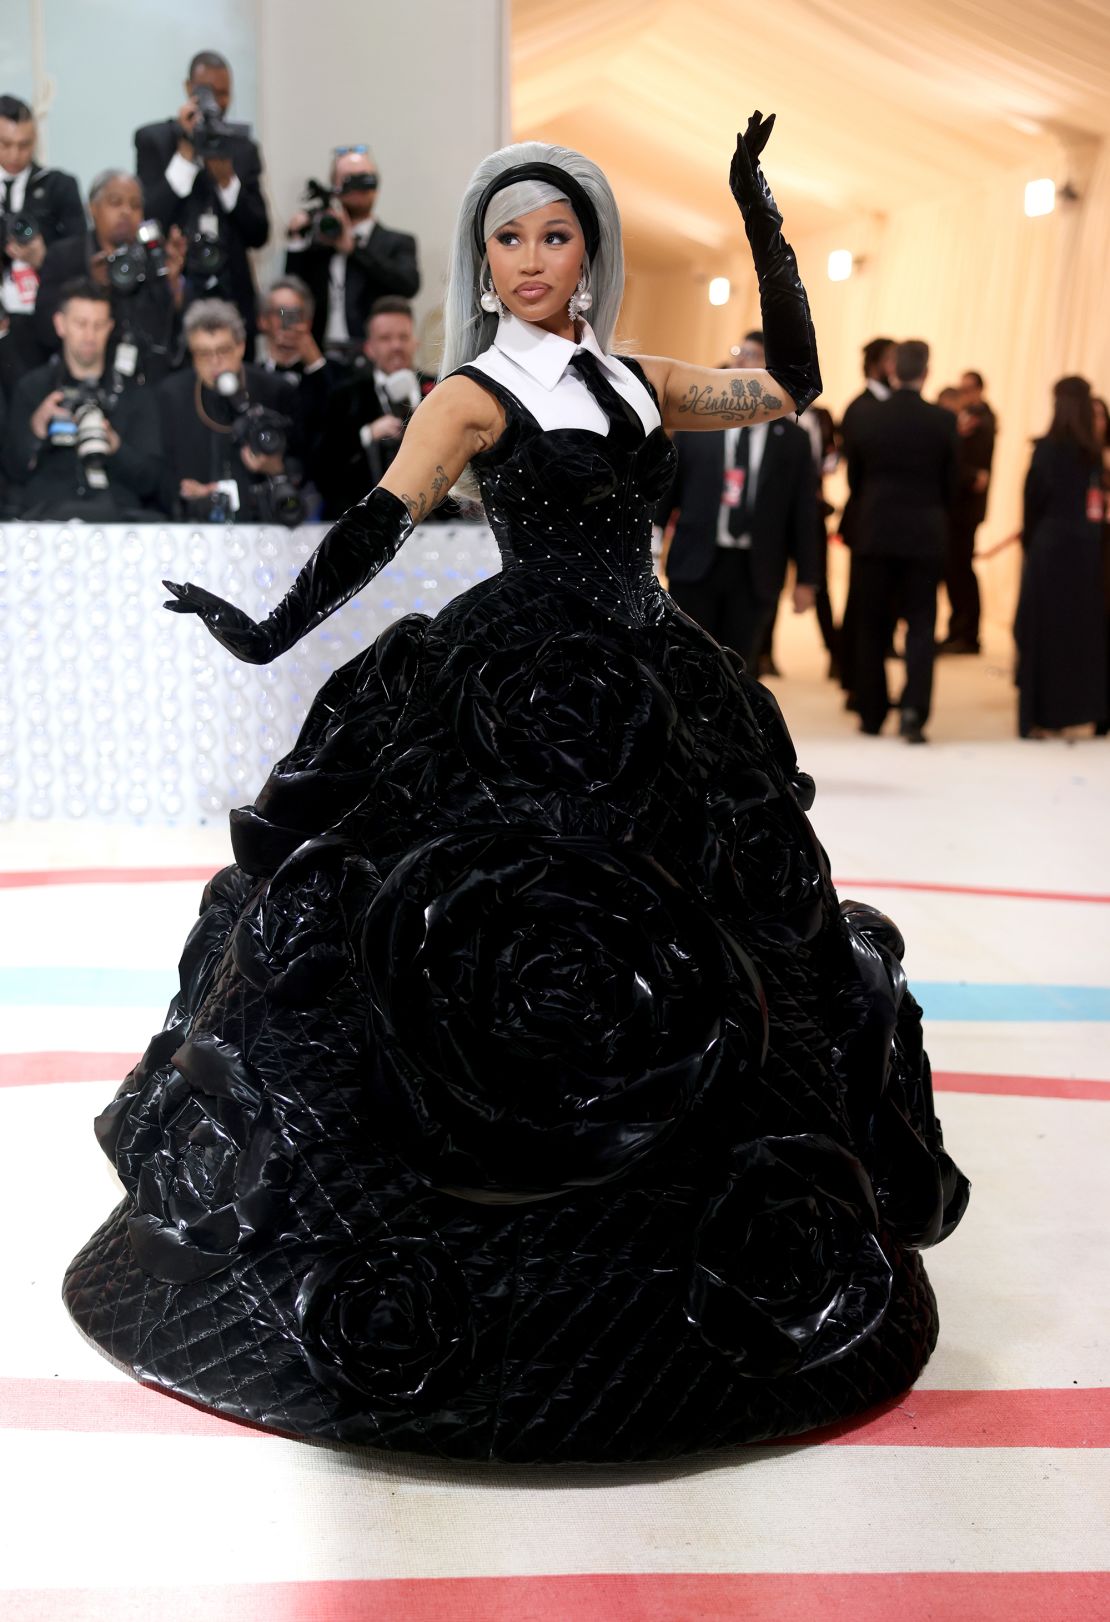 Met Gala 2023 fashion: The best looks from the red carpet | CNN